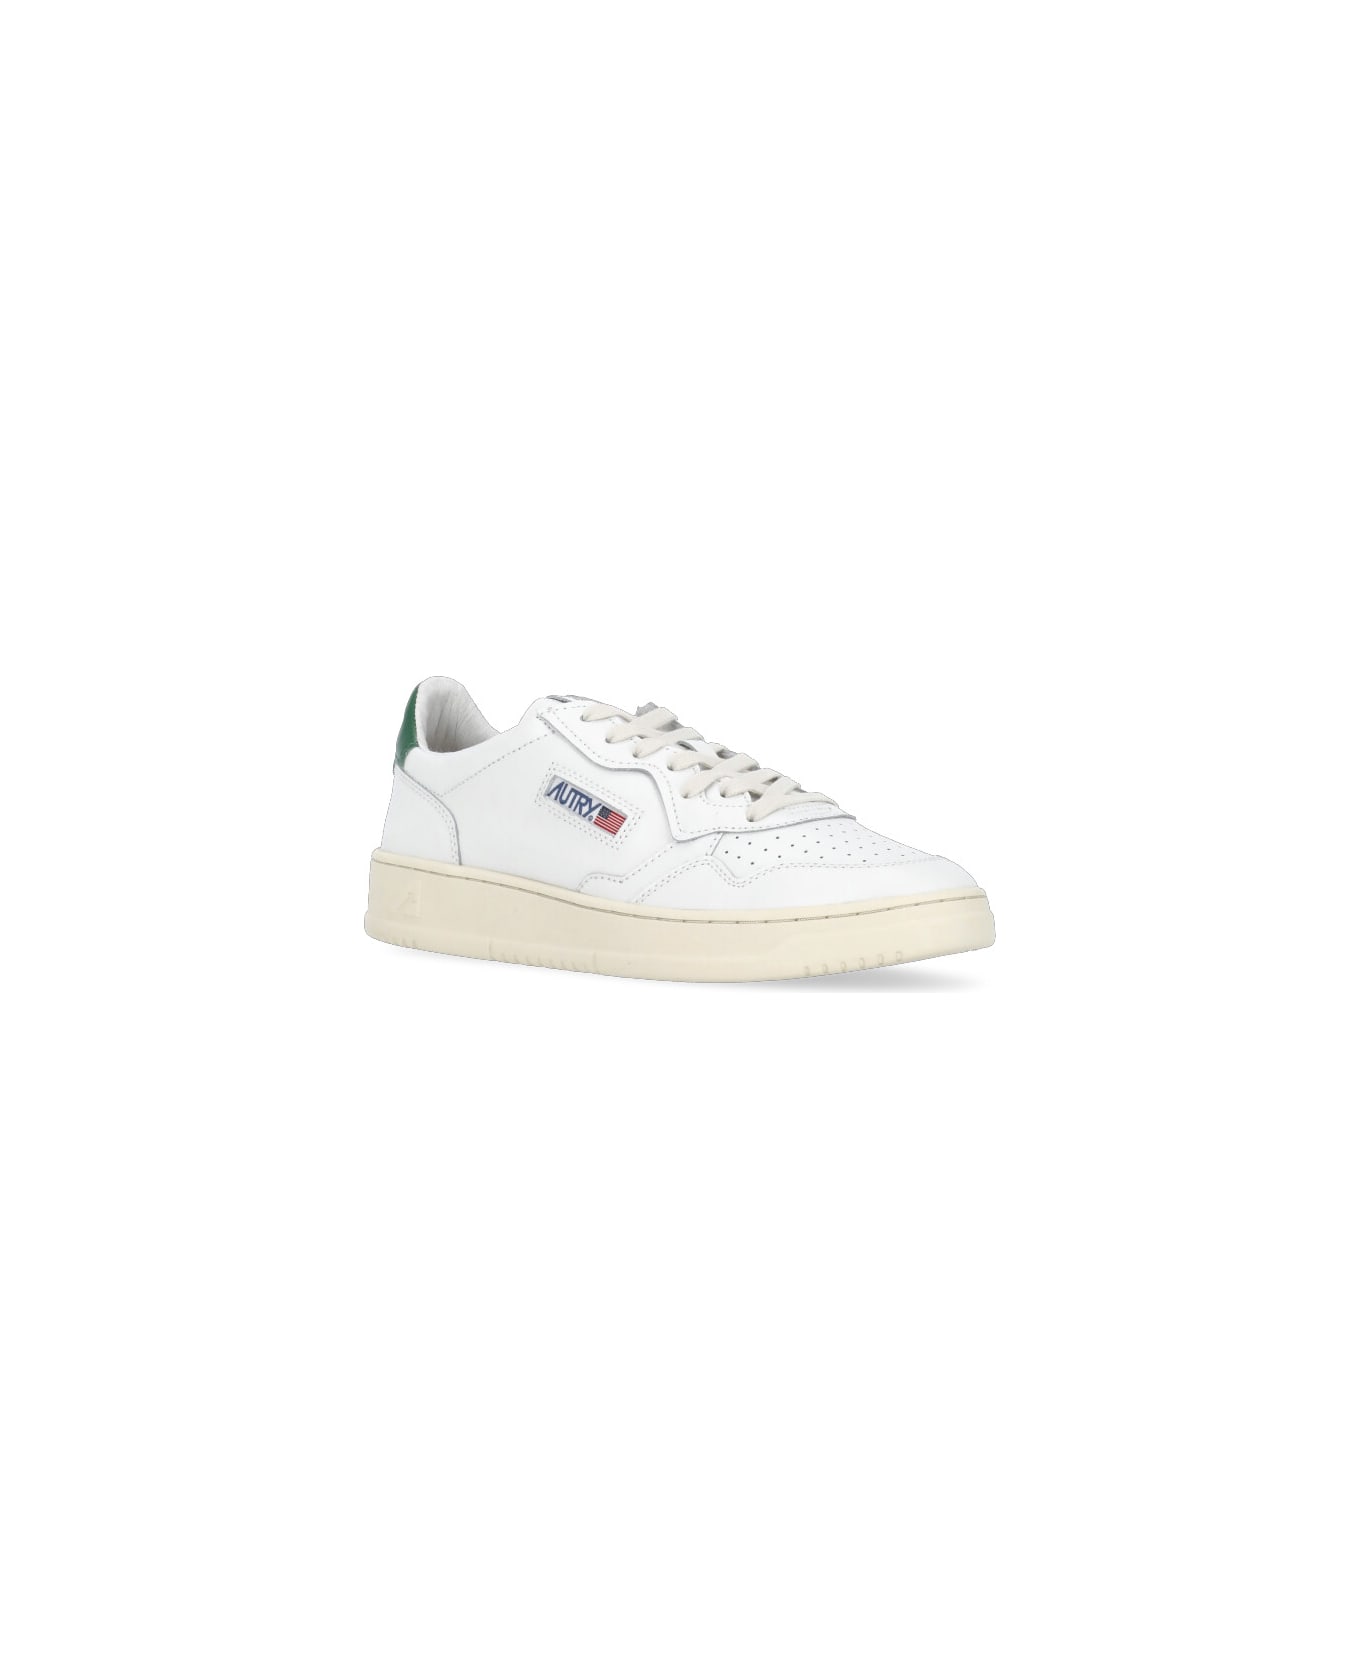 Autry Aulm Ll20 Sneakers - White スニーカー